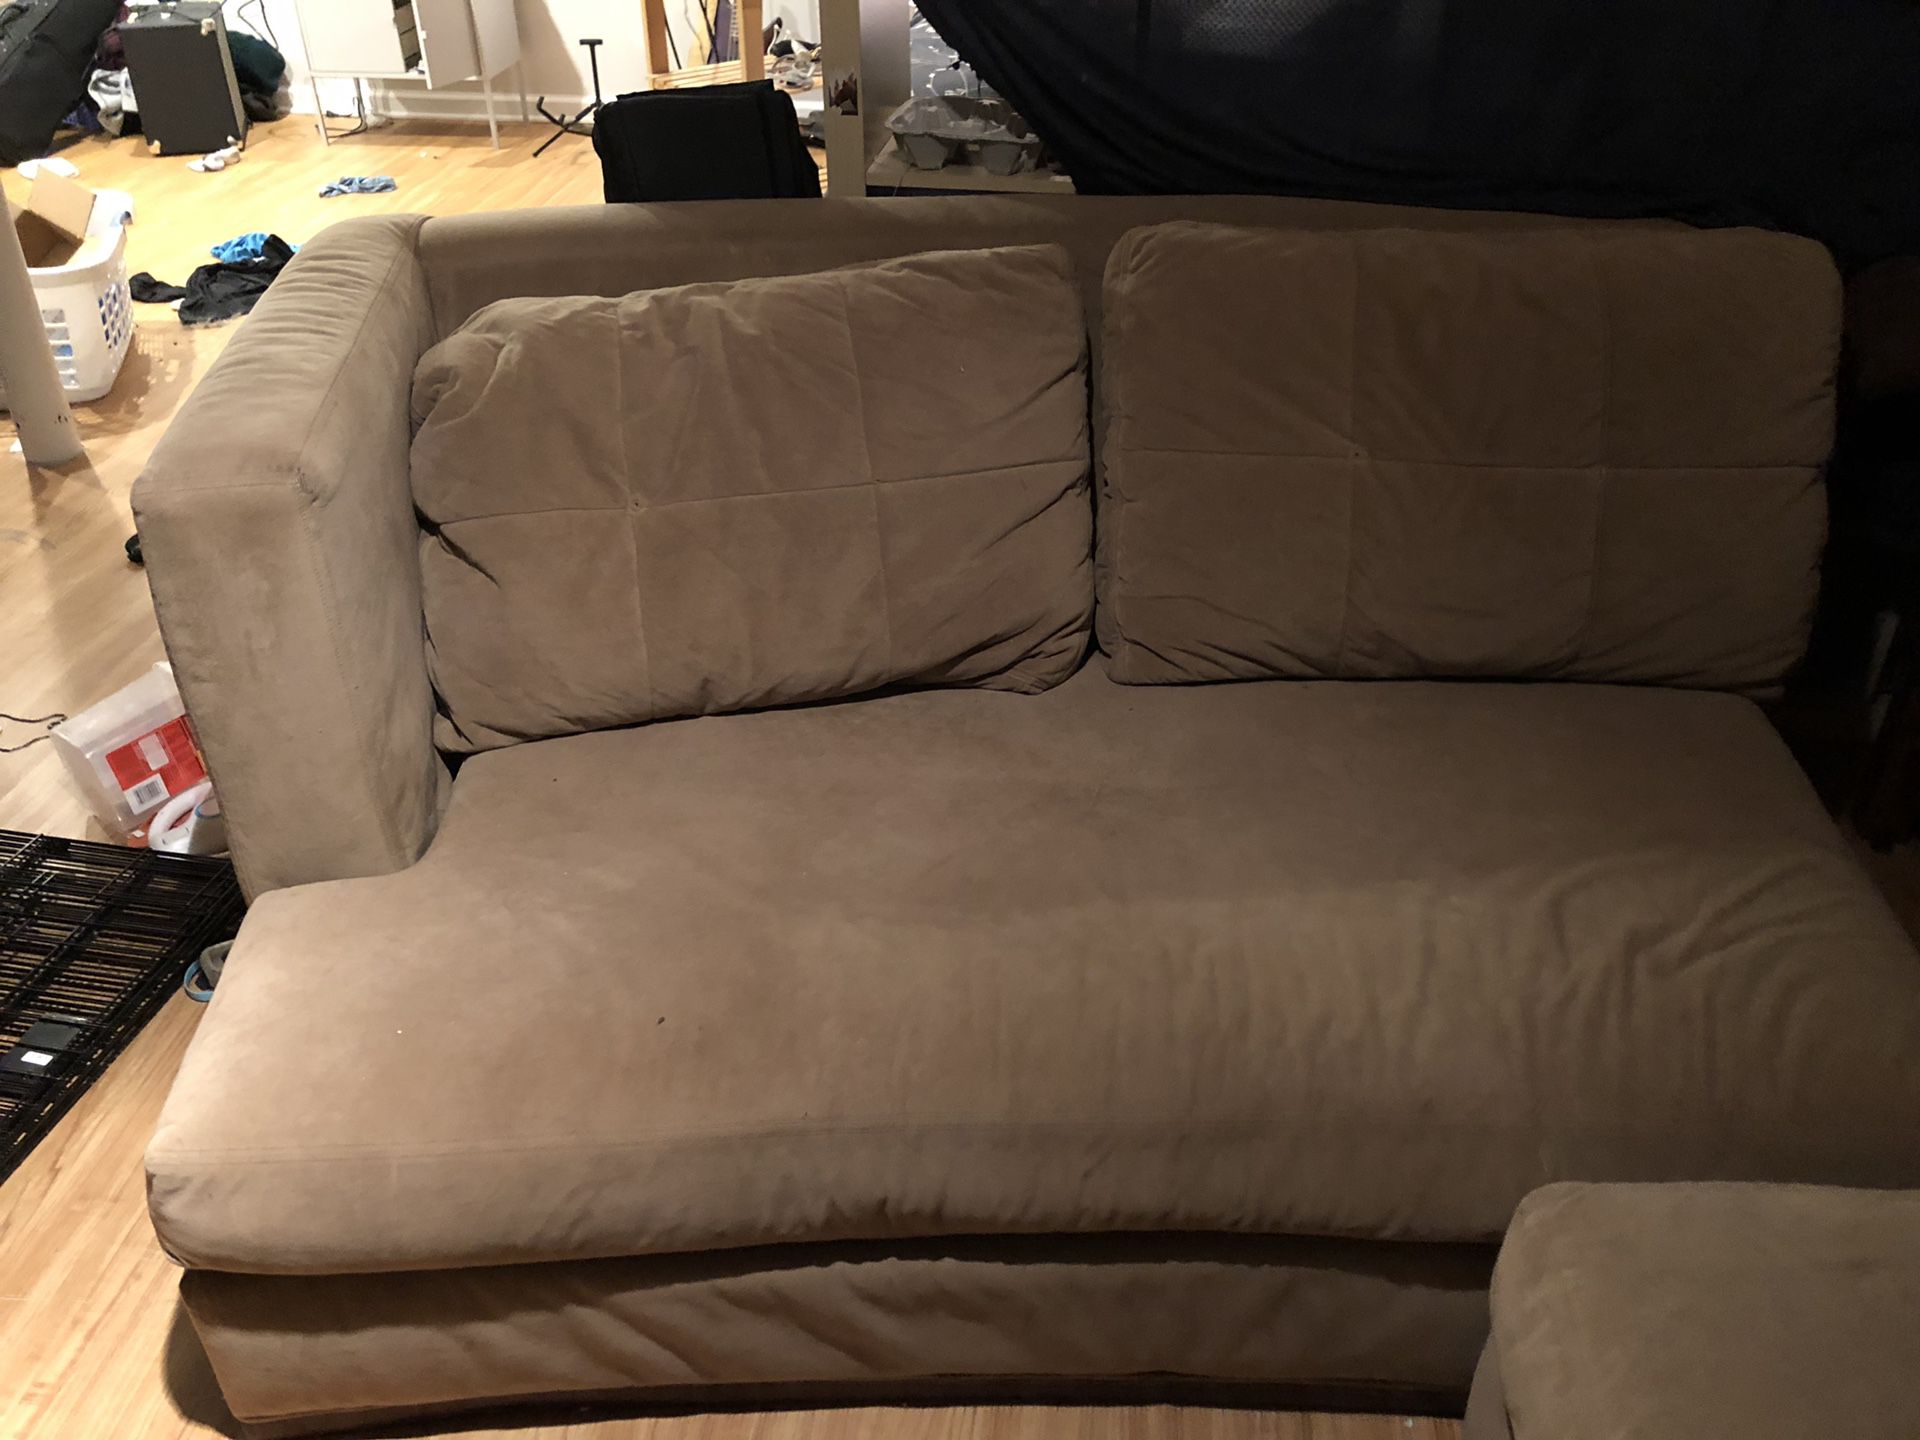 Free 2 piece sofa can hook together as 1 or separated as 2